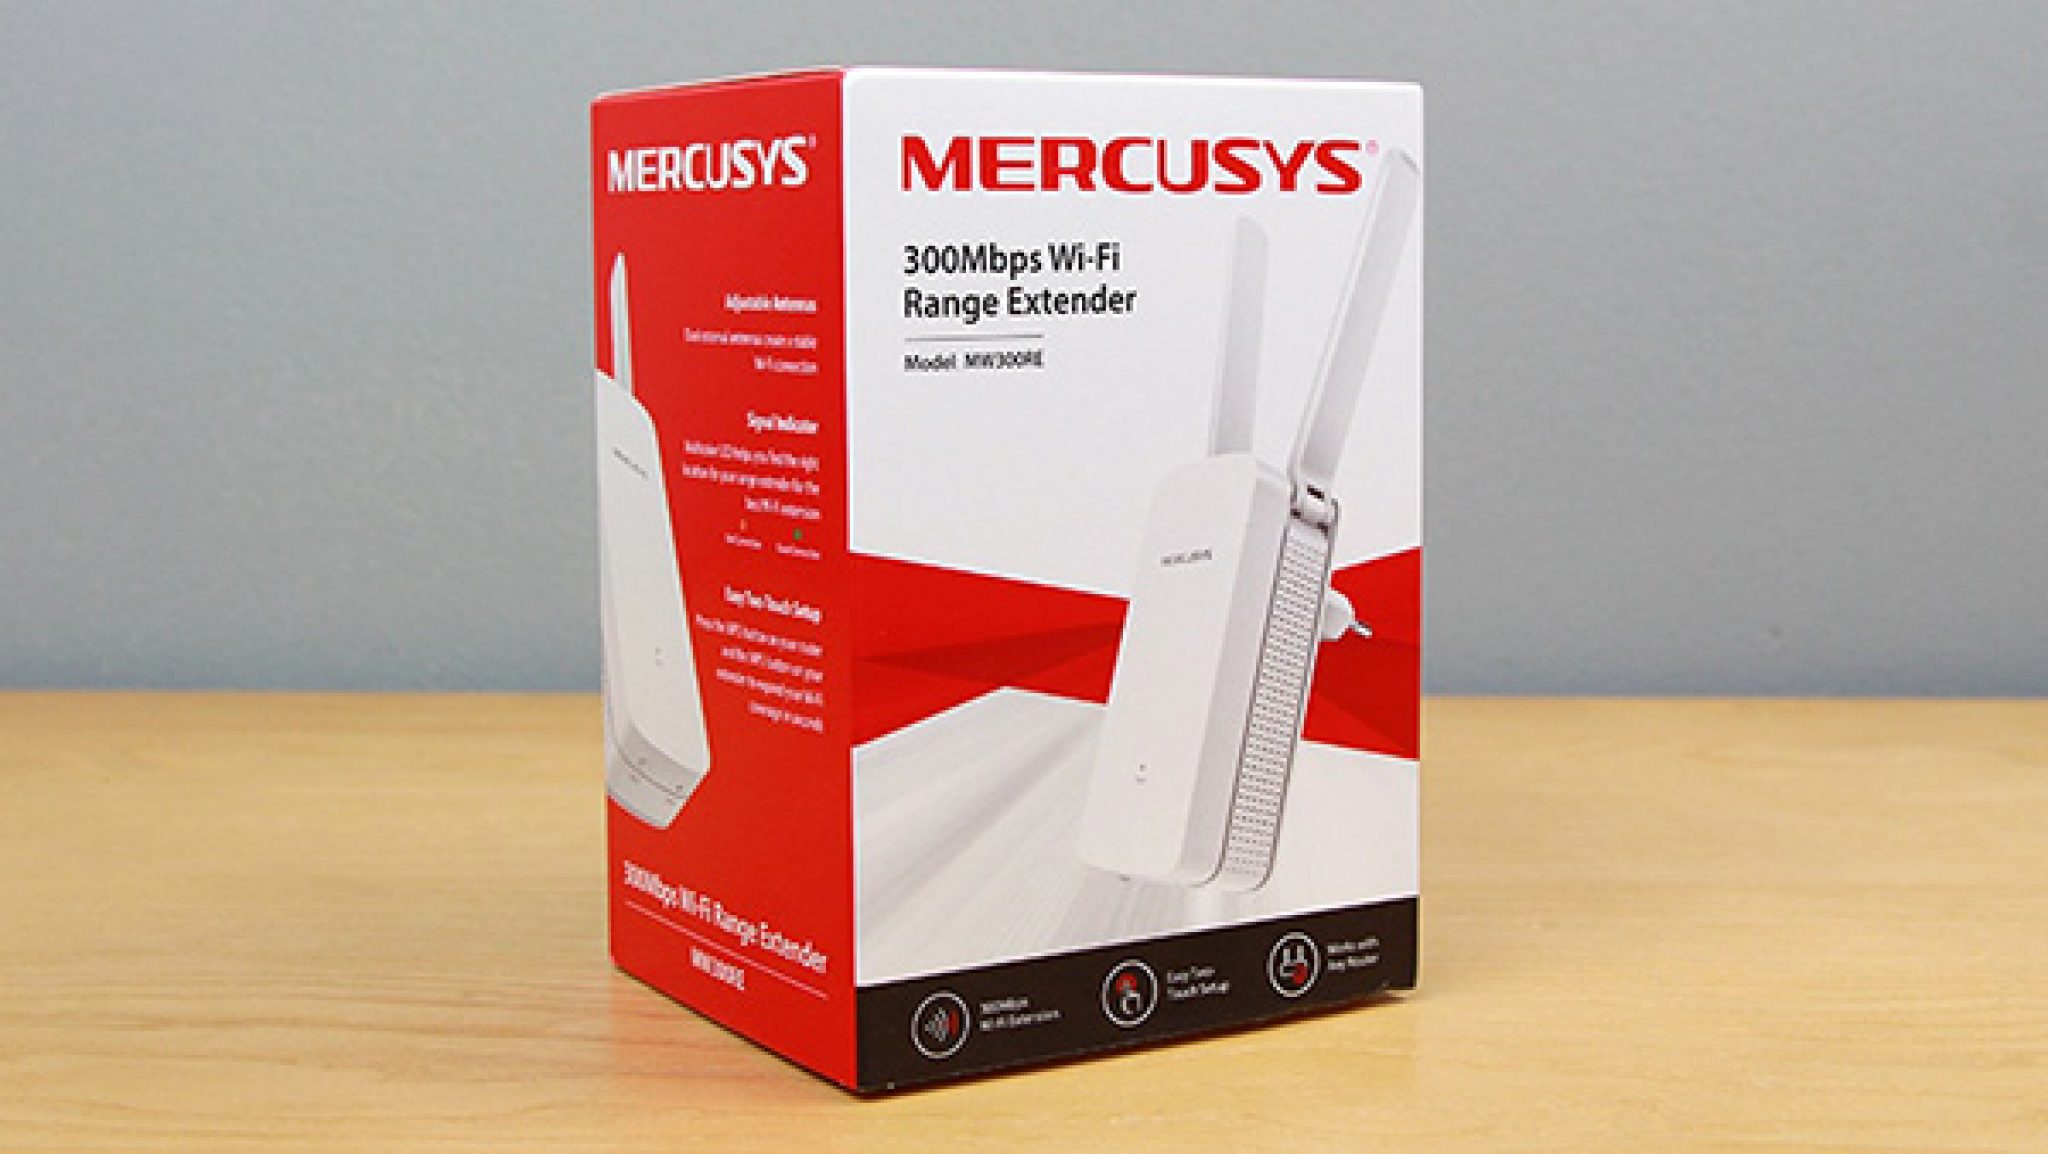 Mercusys support